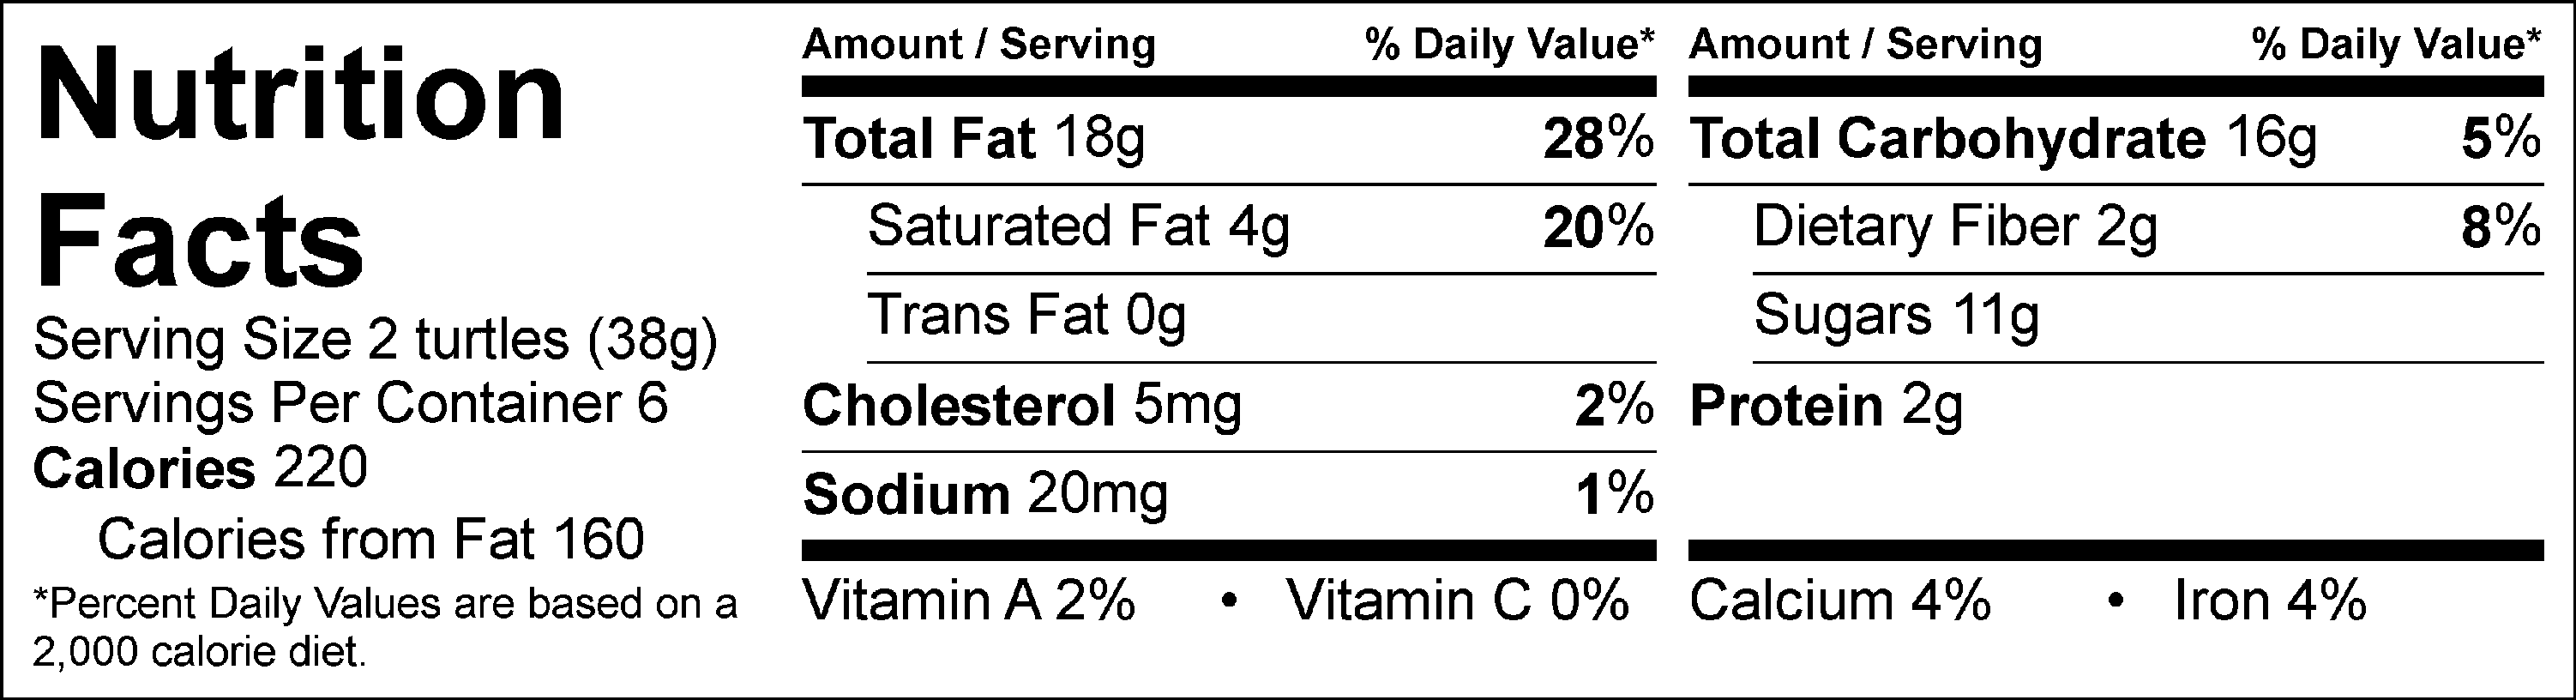 Fat Free Milk Nutrition Facts 119